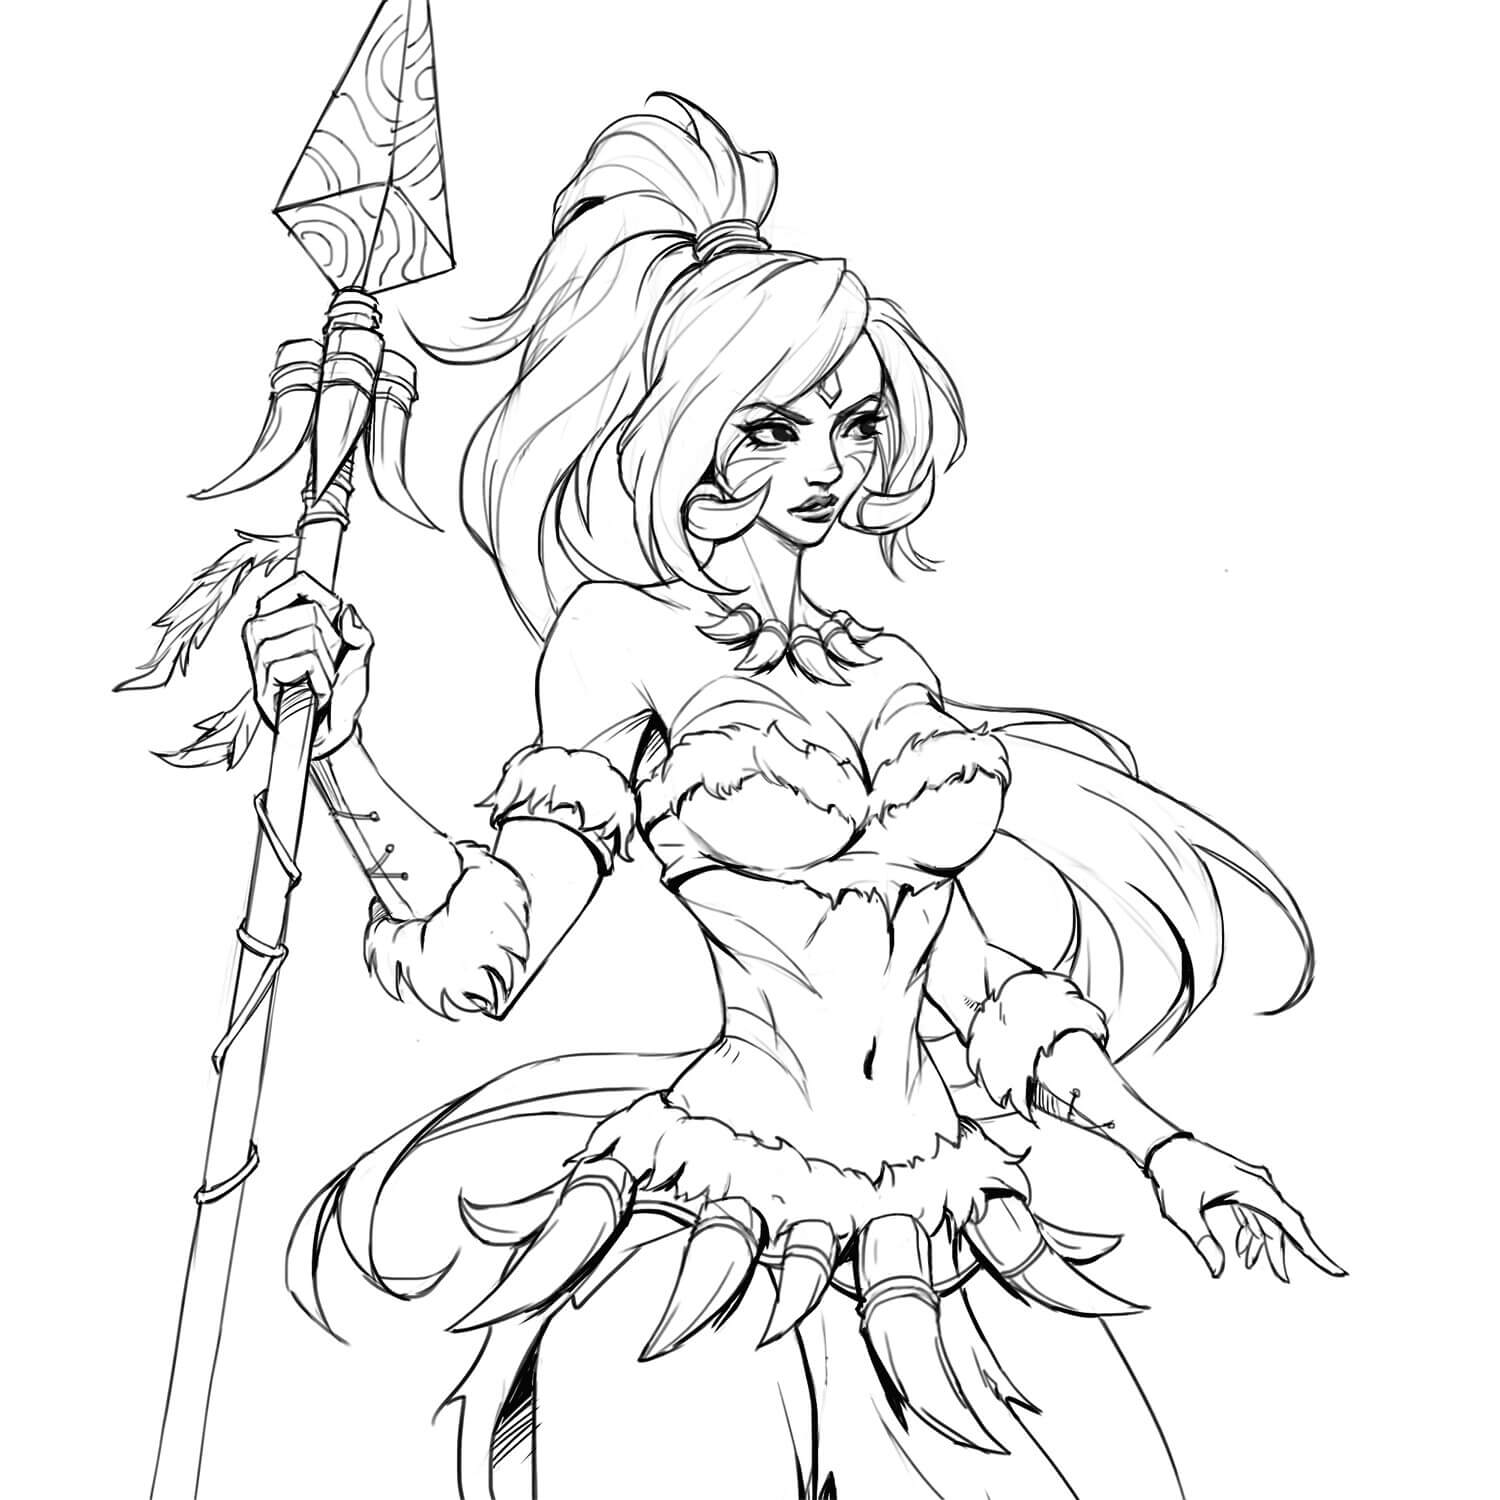 Nidalee League of Legends coloring page